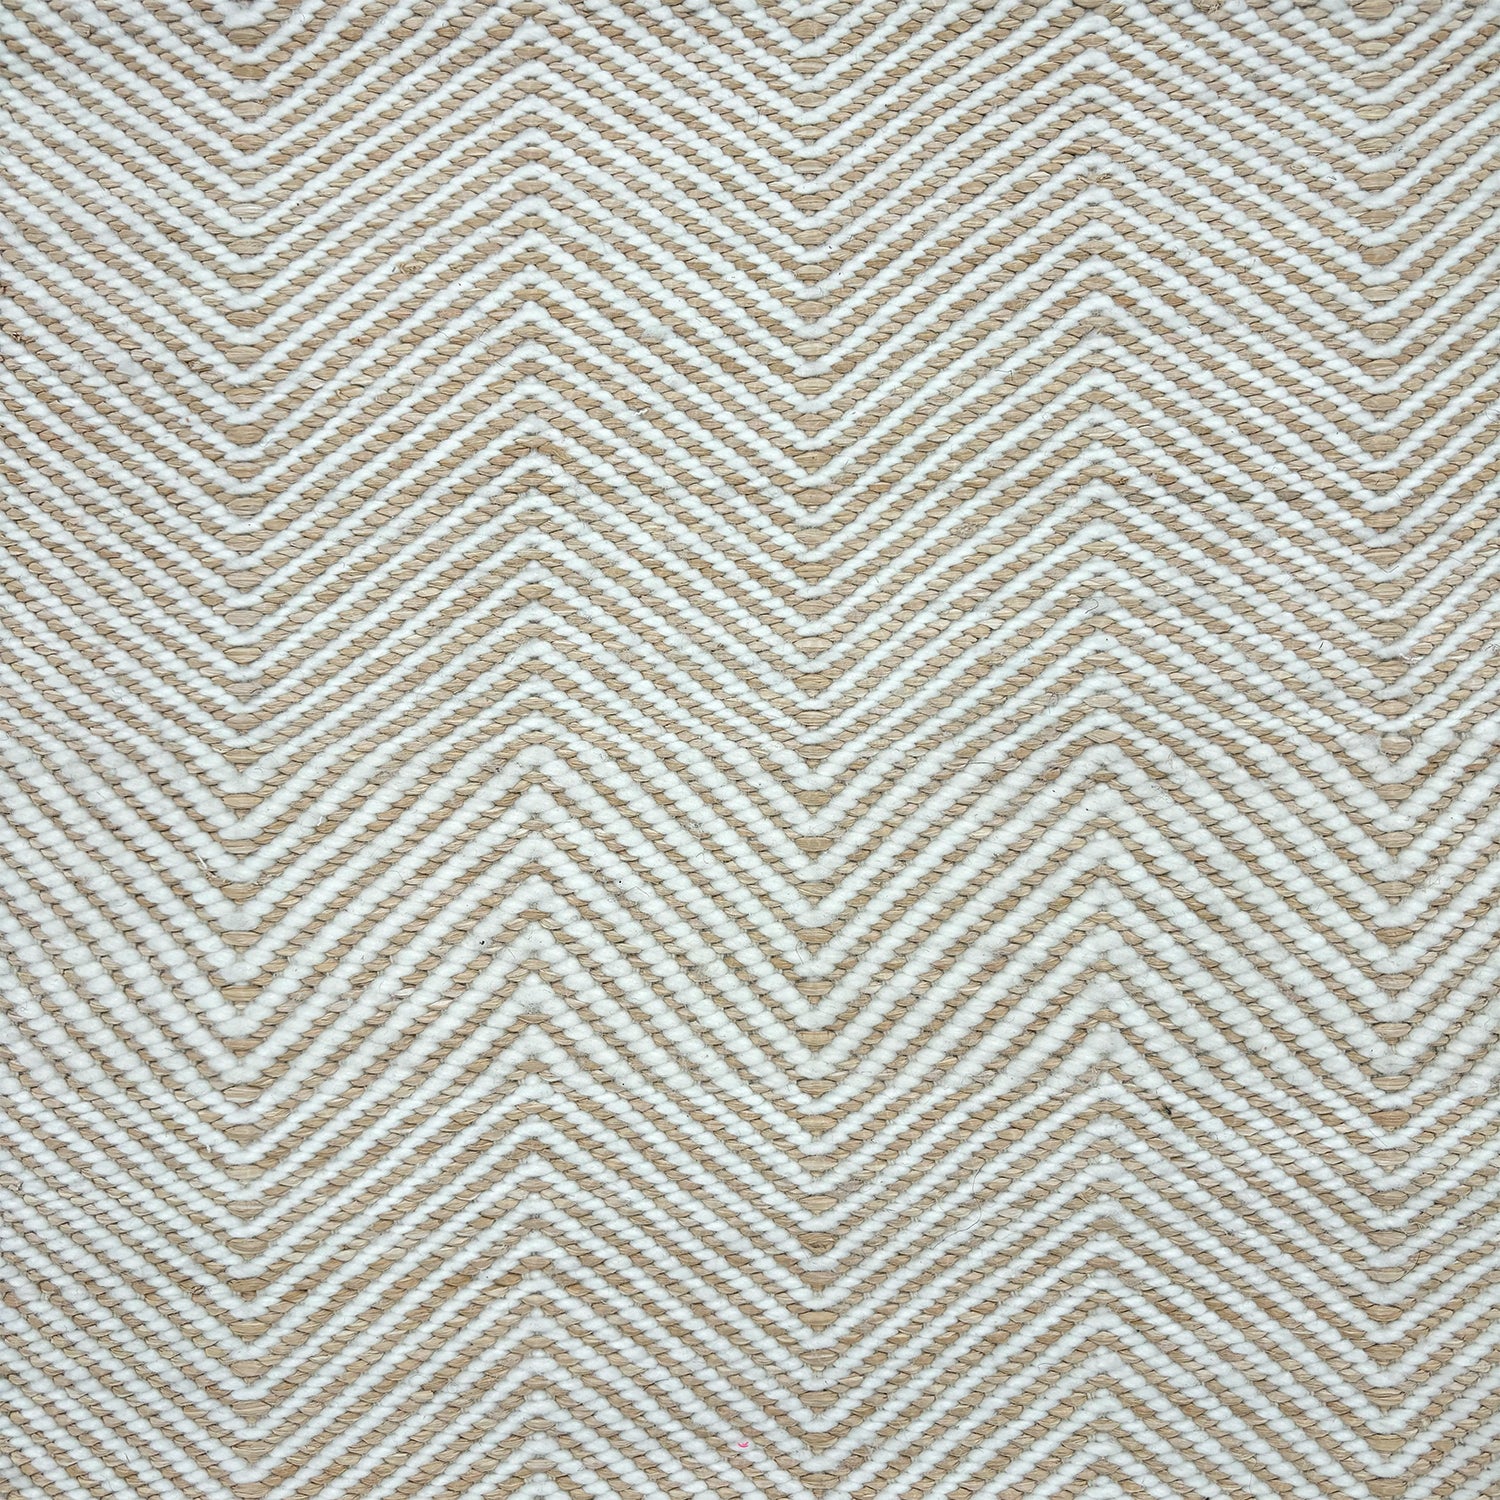 Detail of a handwoven rug in a chevron pattern in natural raffia and ivory yarn